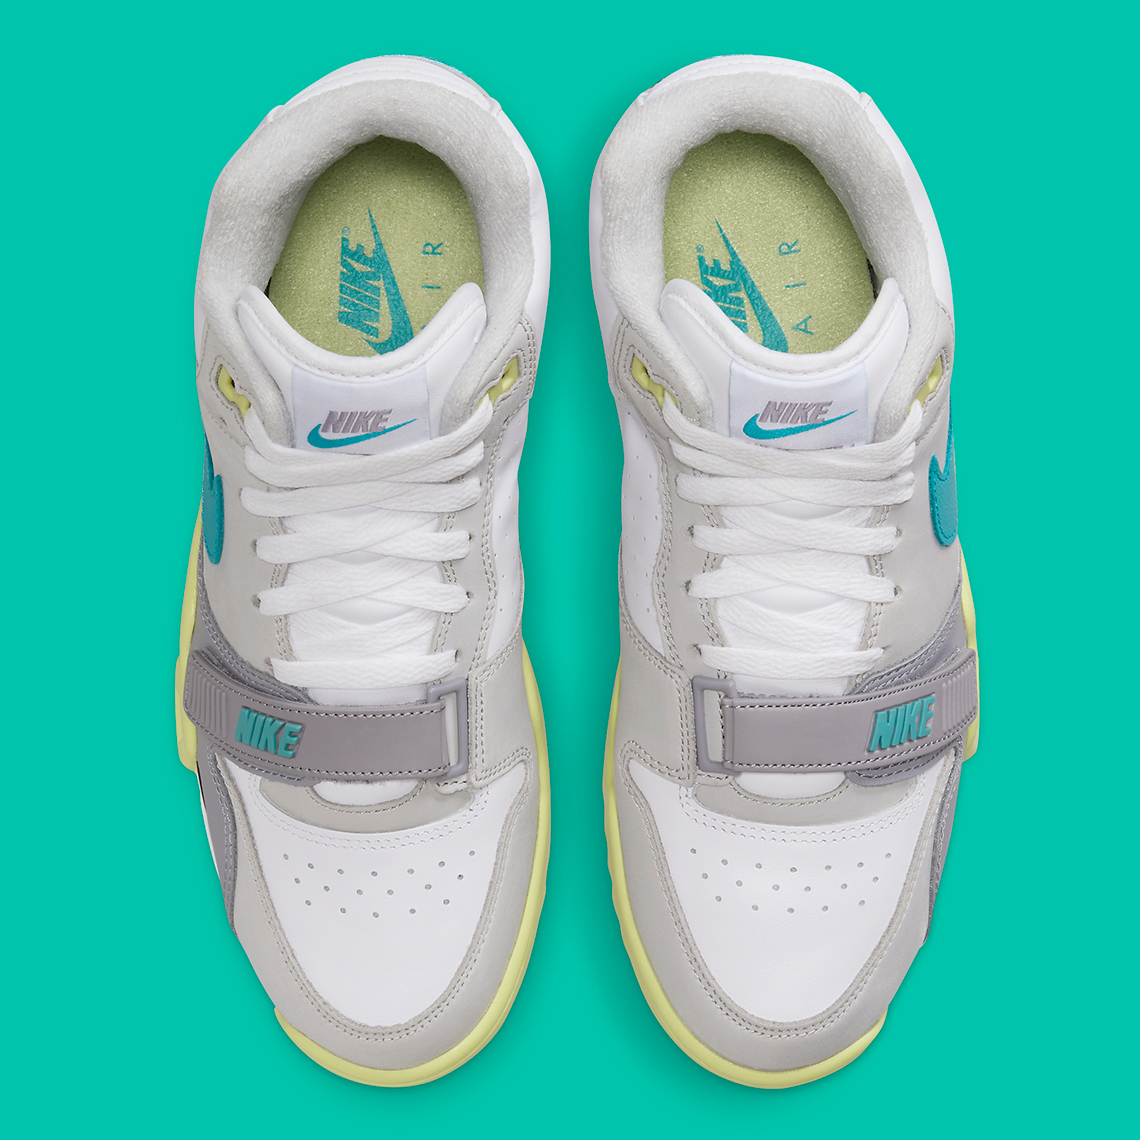 Nike Air Trainer 1 Citron Fq8828 100 Release Date 3